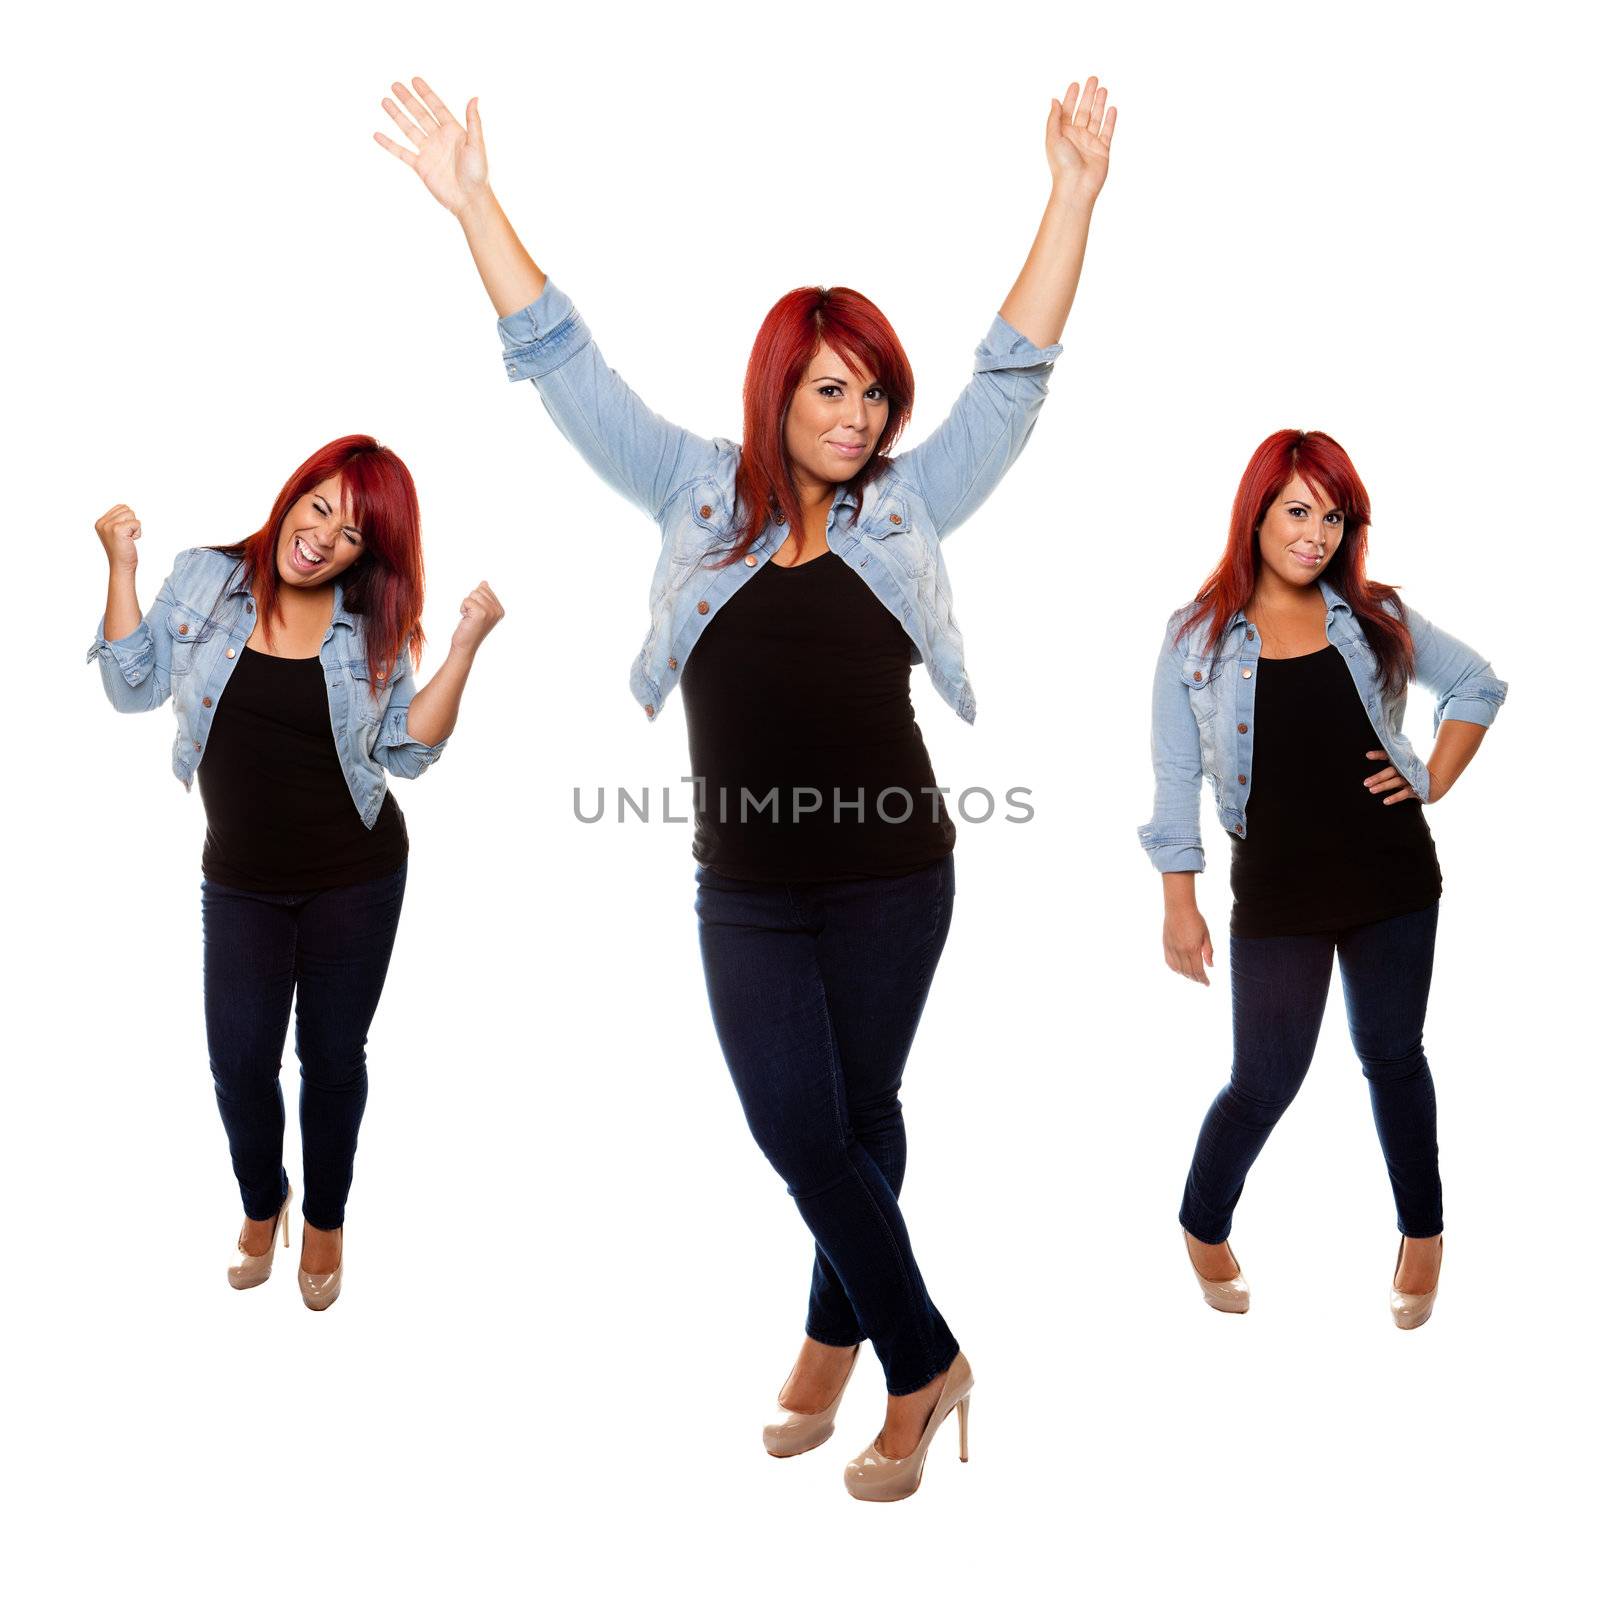 Young woman proudly shows off her physique after weight loss isolated on a white background.